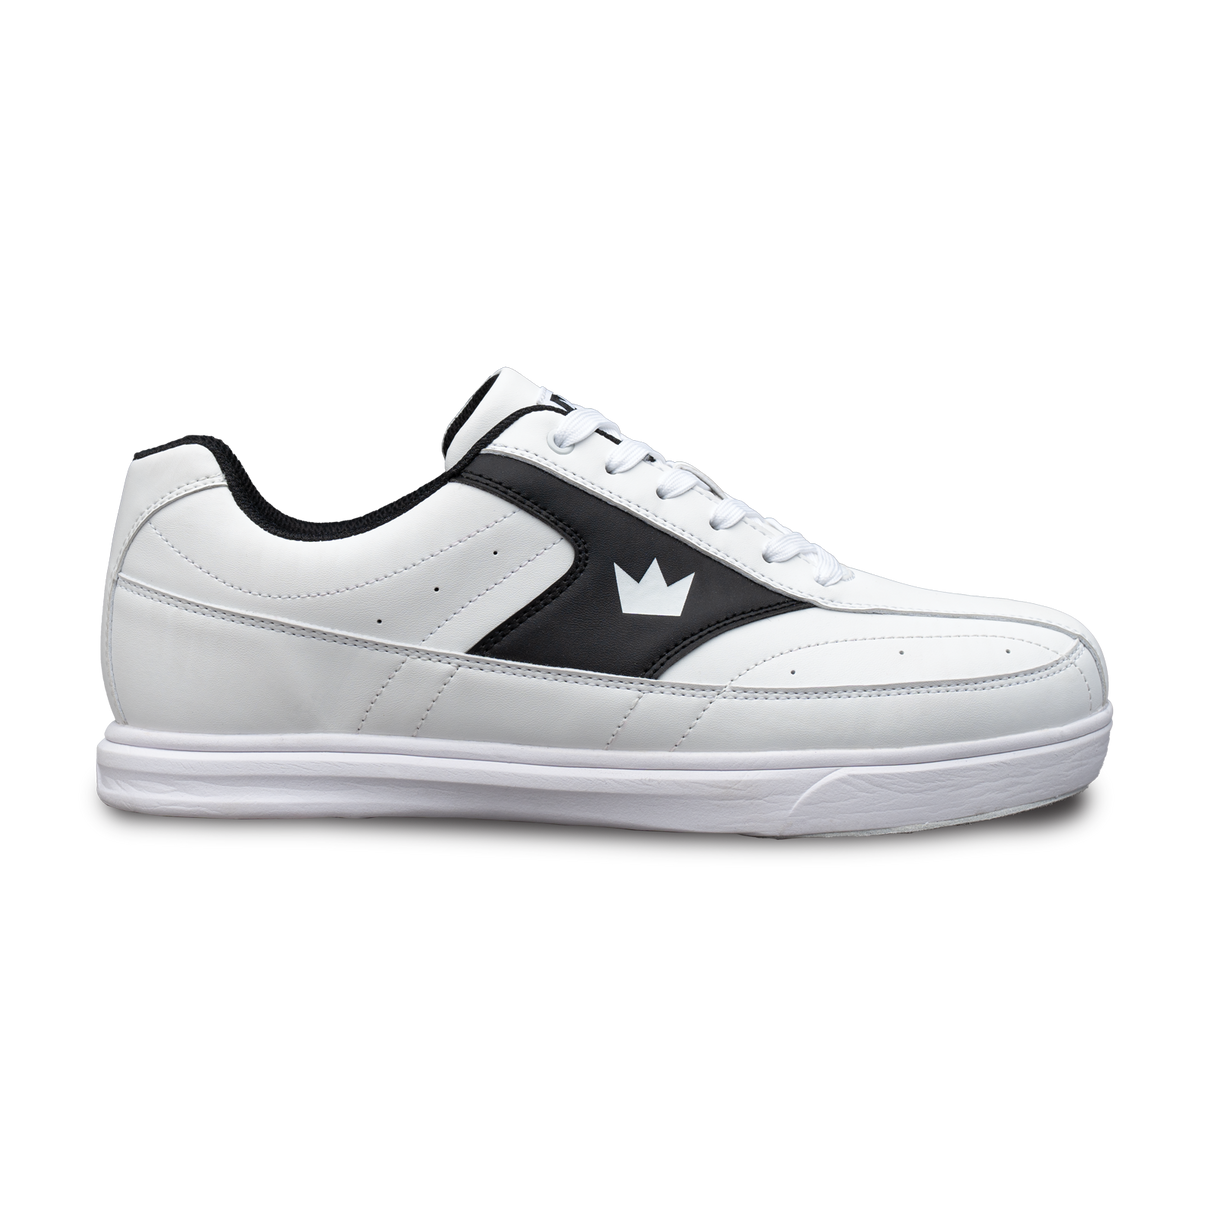 Brunswick Renegade White/Black Bowling Shoes * Performance synthetic uppers * Extra-light molded EVA outsole * Extremely comfortable * Pure slide microfiber slide soles on both shoes * Foam padded collar and tongue * Superior slide immediately *  * 